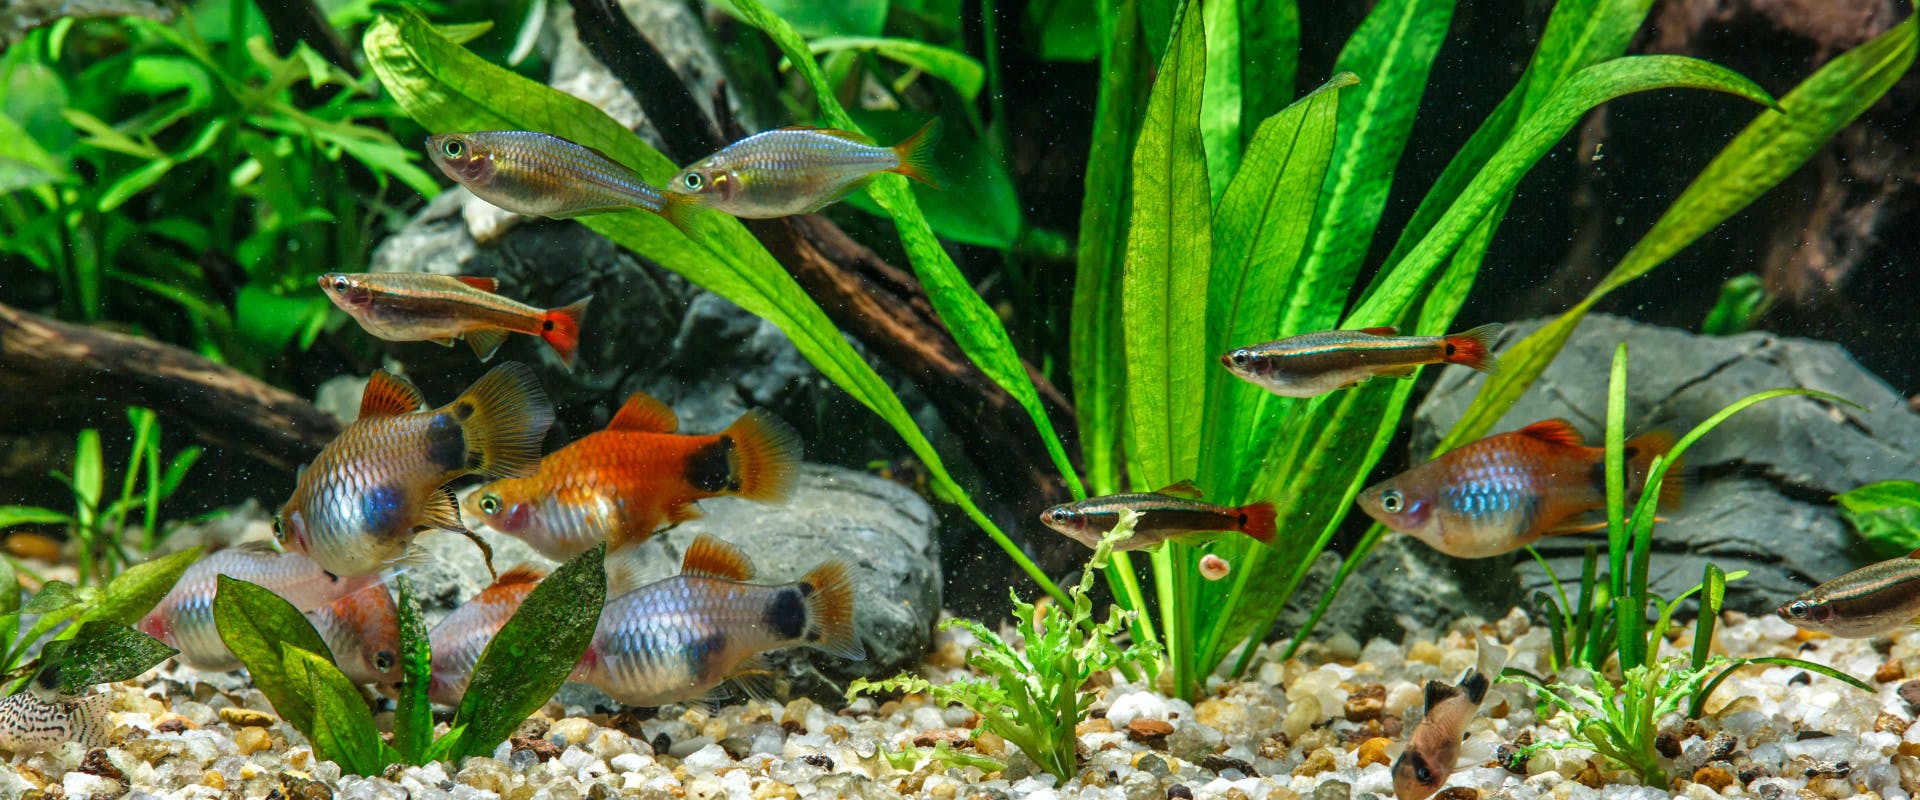 a tank of goldfish guppies and neon tetras in a tank filled with live plants and tank decorations